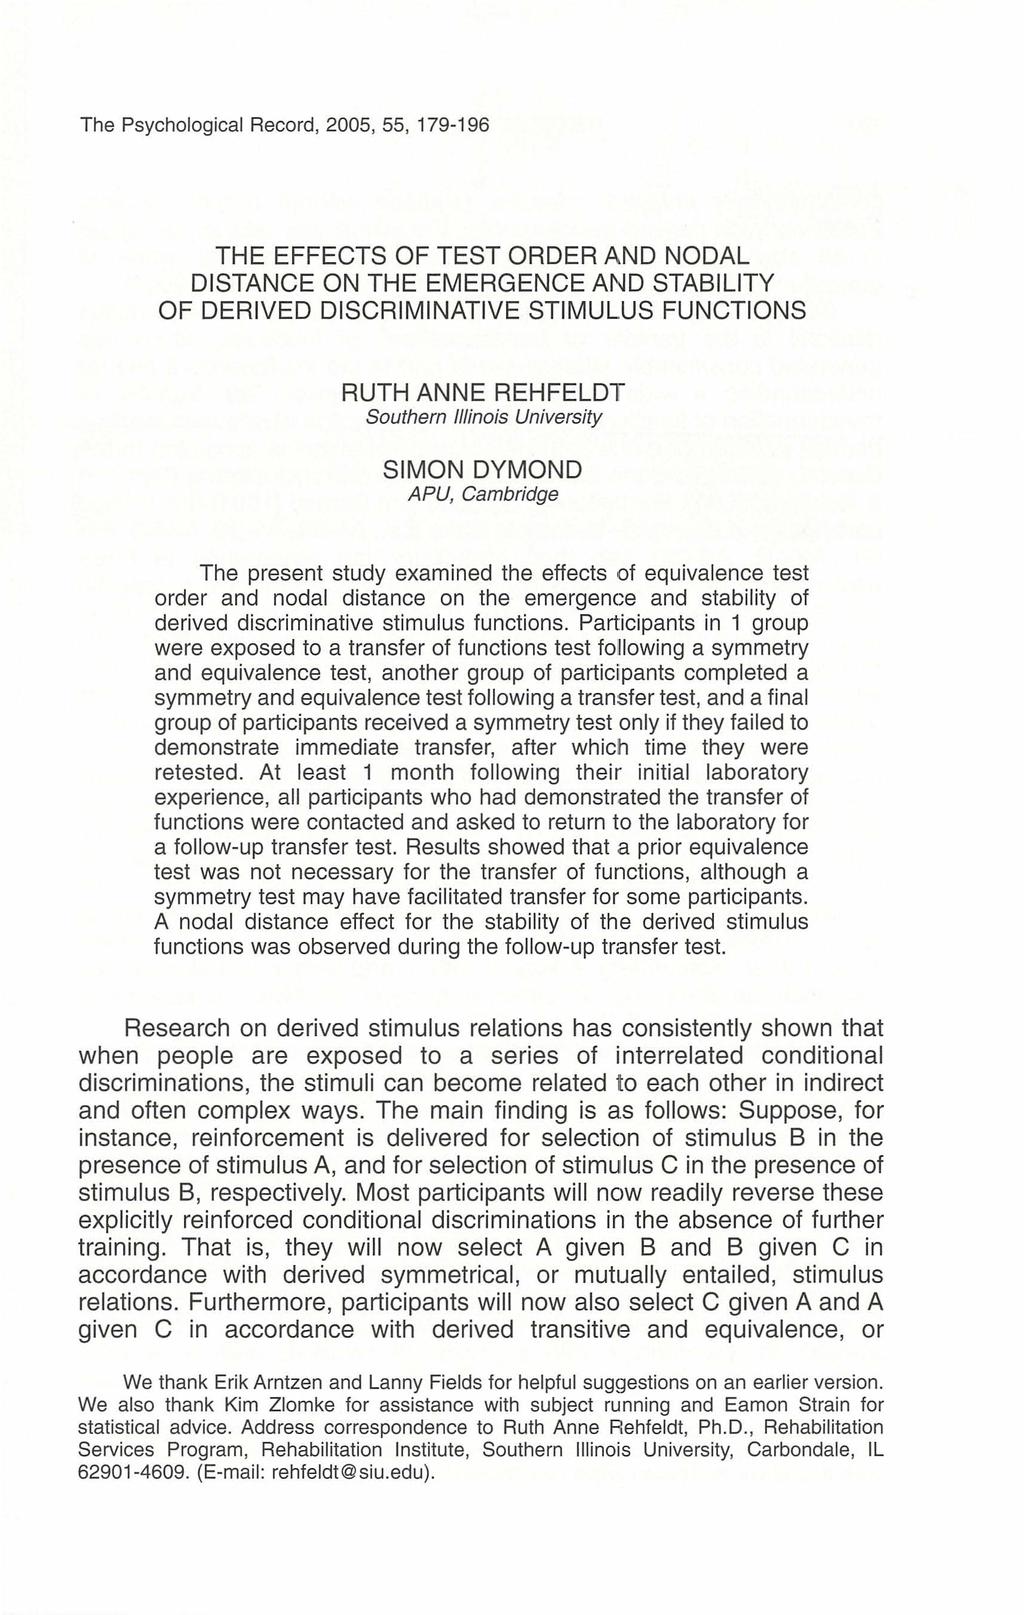 The Psychological Record, 2005, 55, 179-196 THE EFFECTS OF TEST ORDER AND NODAL DISTANCE ON THE EMERGENCE AND STABILITY OF DERIVED DISCRIMINATIVE STIMULUS FUNCTIONS RUTH ANNE REHFELDT Southern